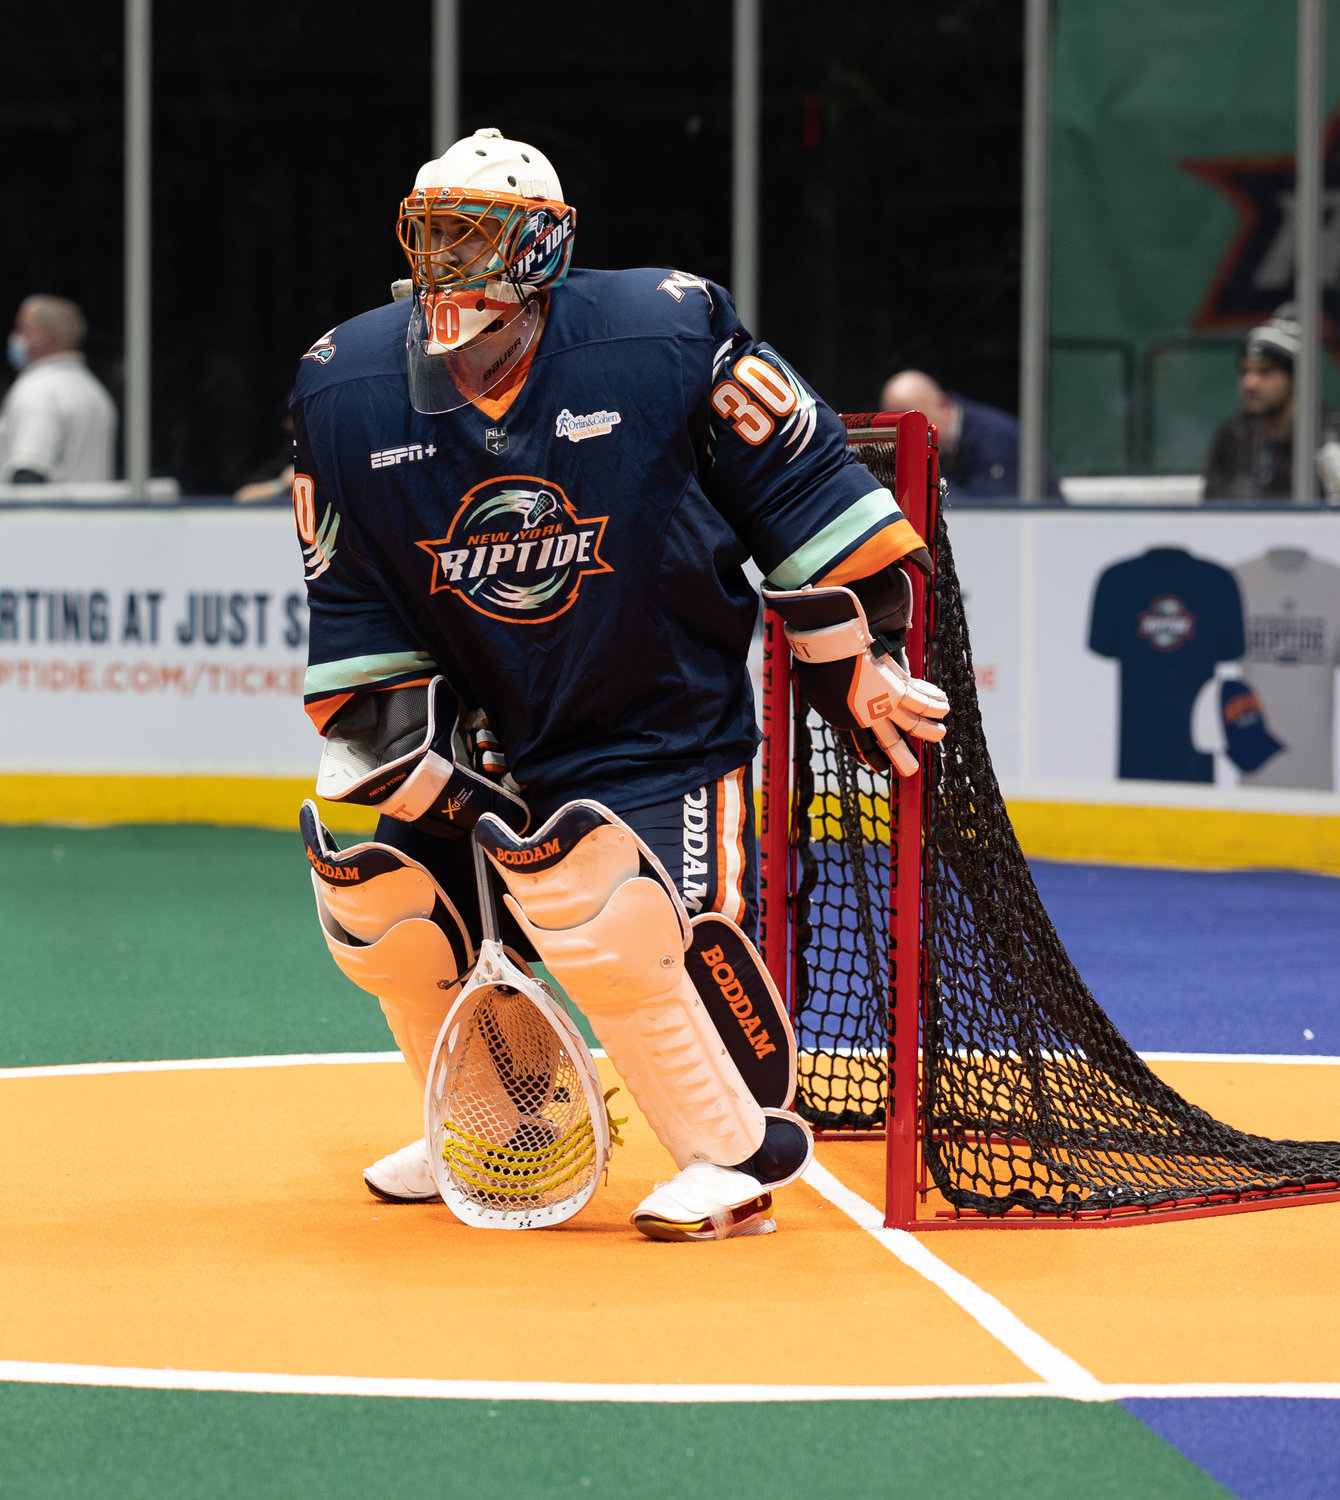 Steven Orleman played strong between the pipes for the Riptide after entering Saturday's game late in the first half.